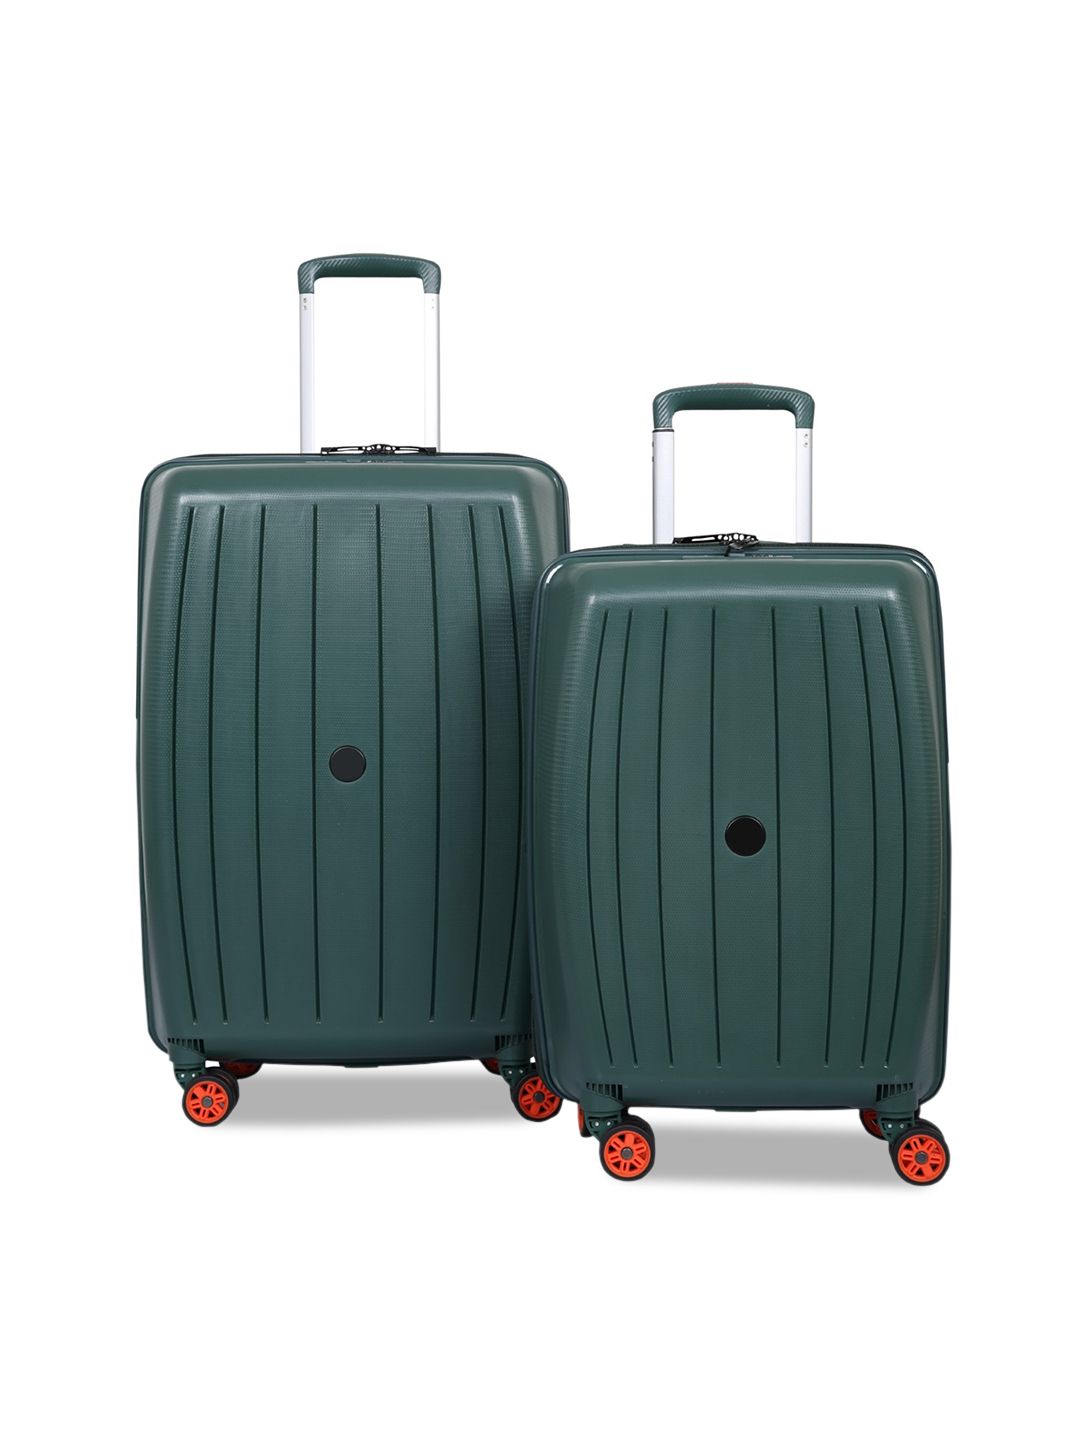 Polo Class Set of 2 Green Scan Trolley Bag Price in India